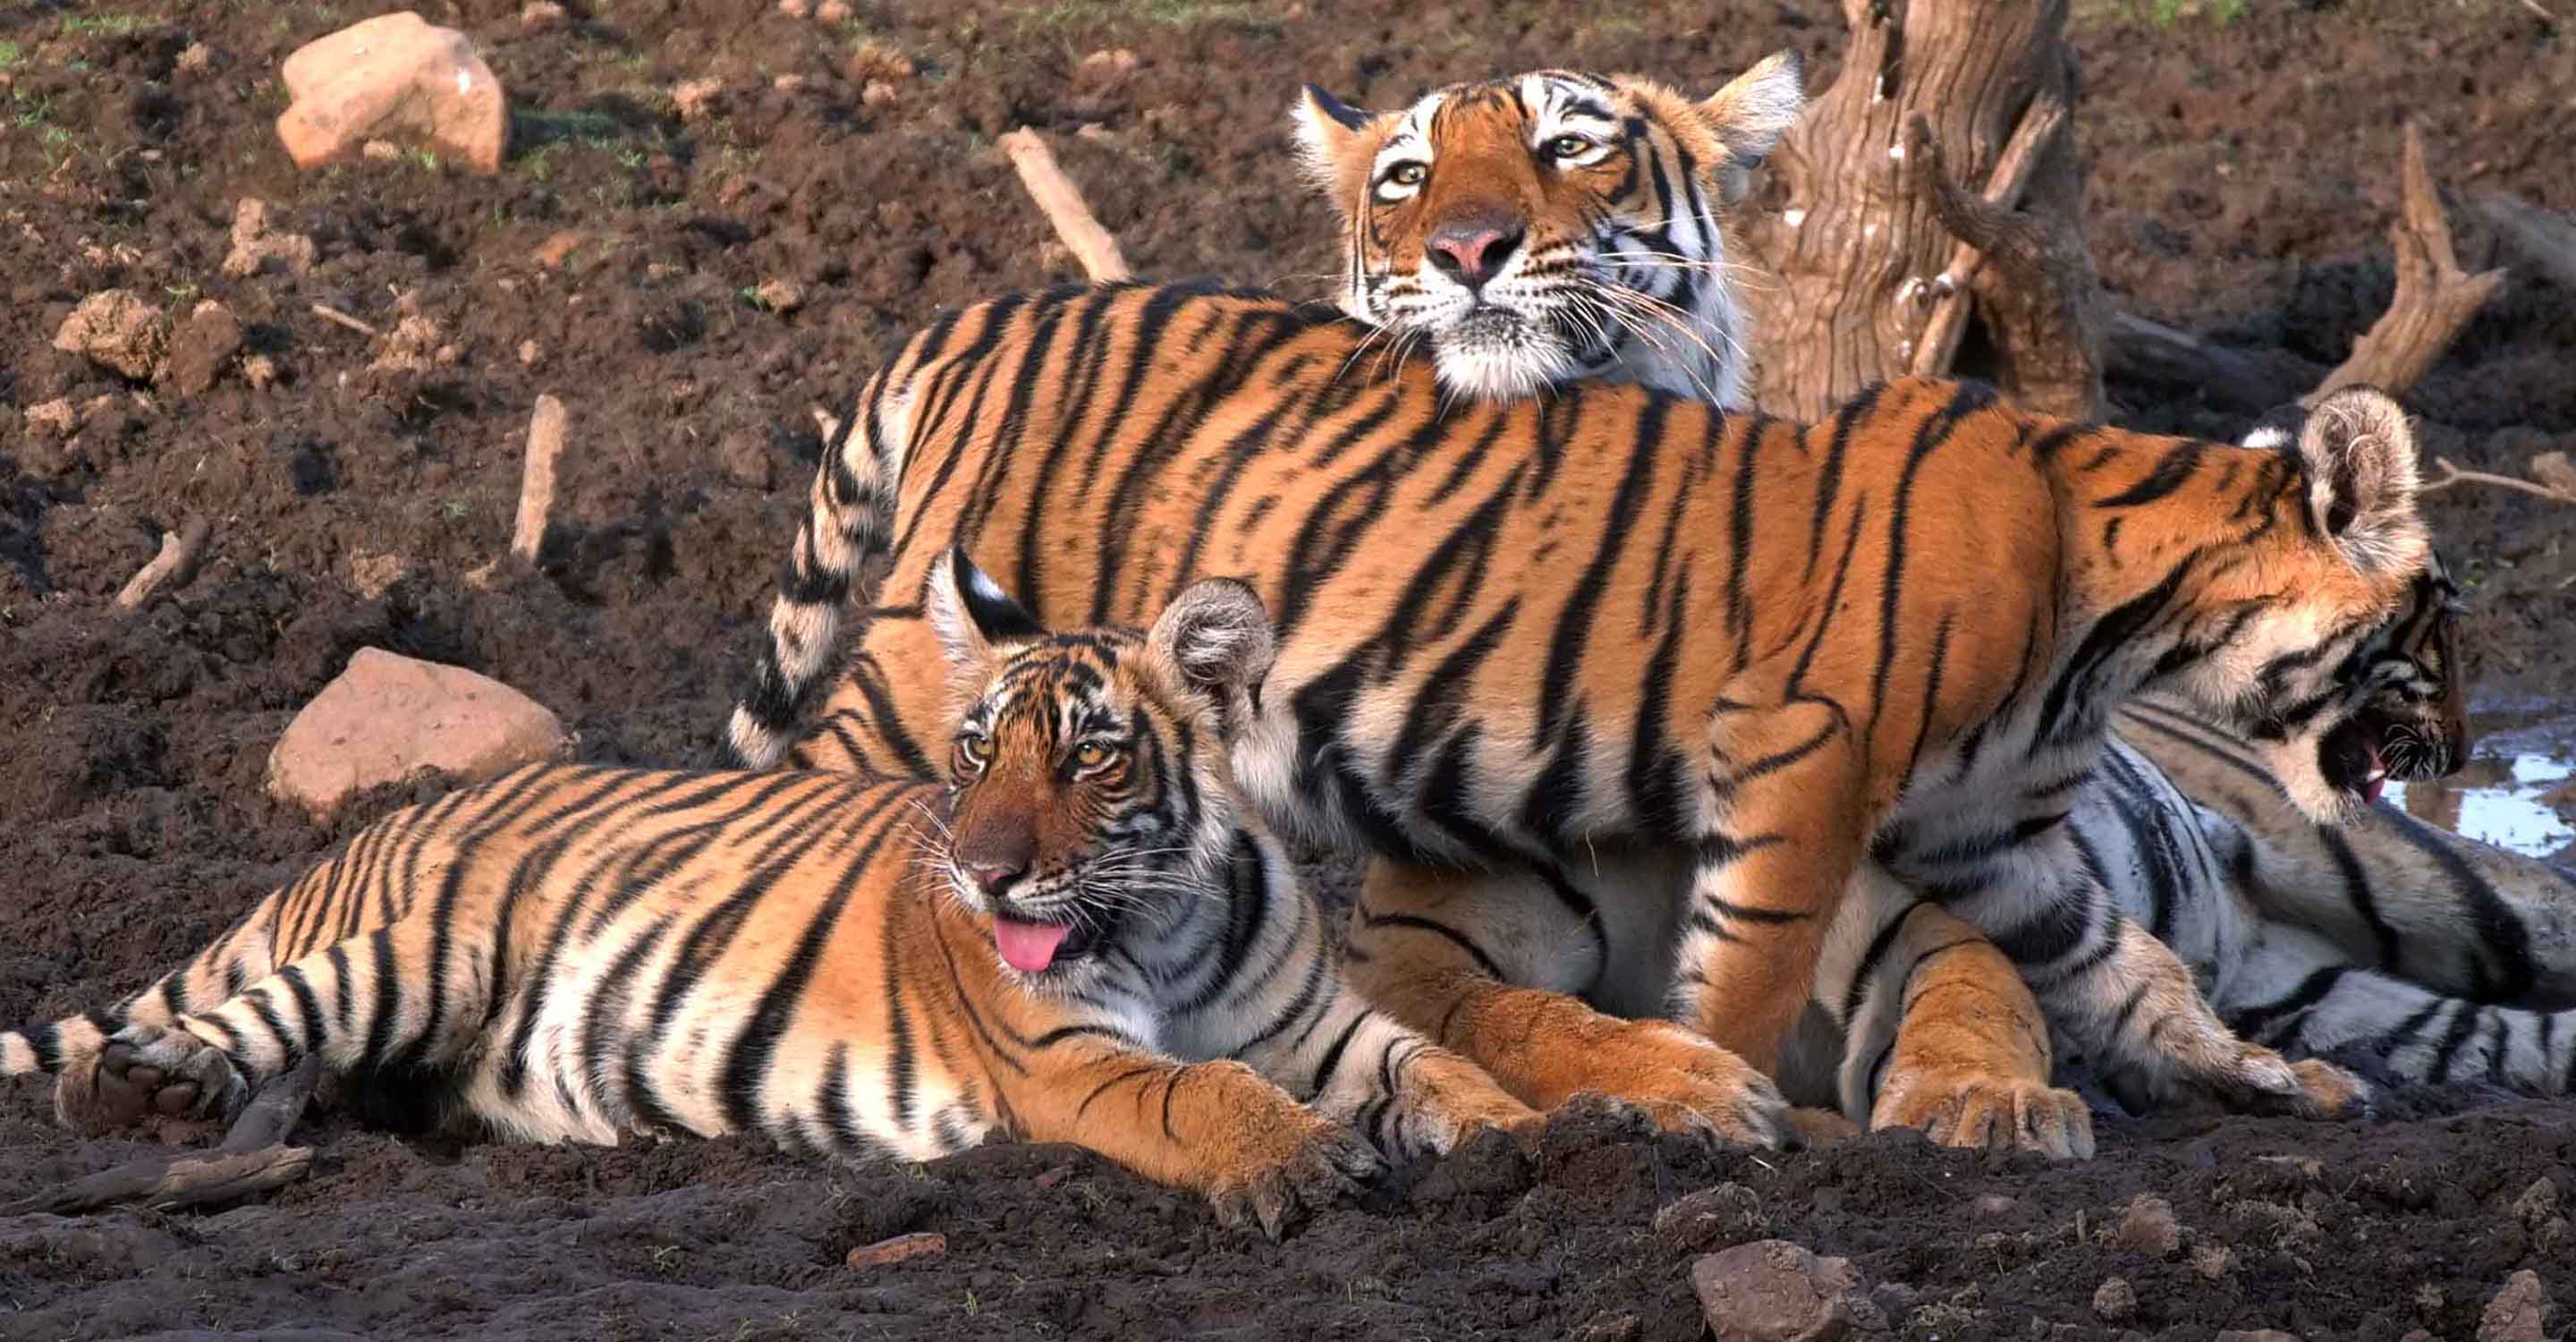 A mother tiger and her two cubs rest together in Ranthambore National Park, India